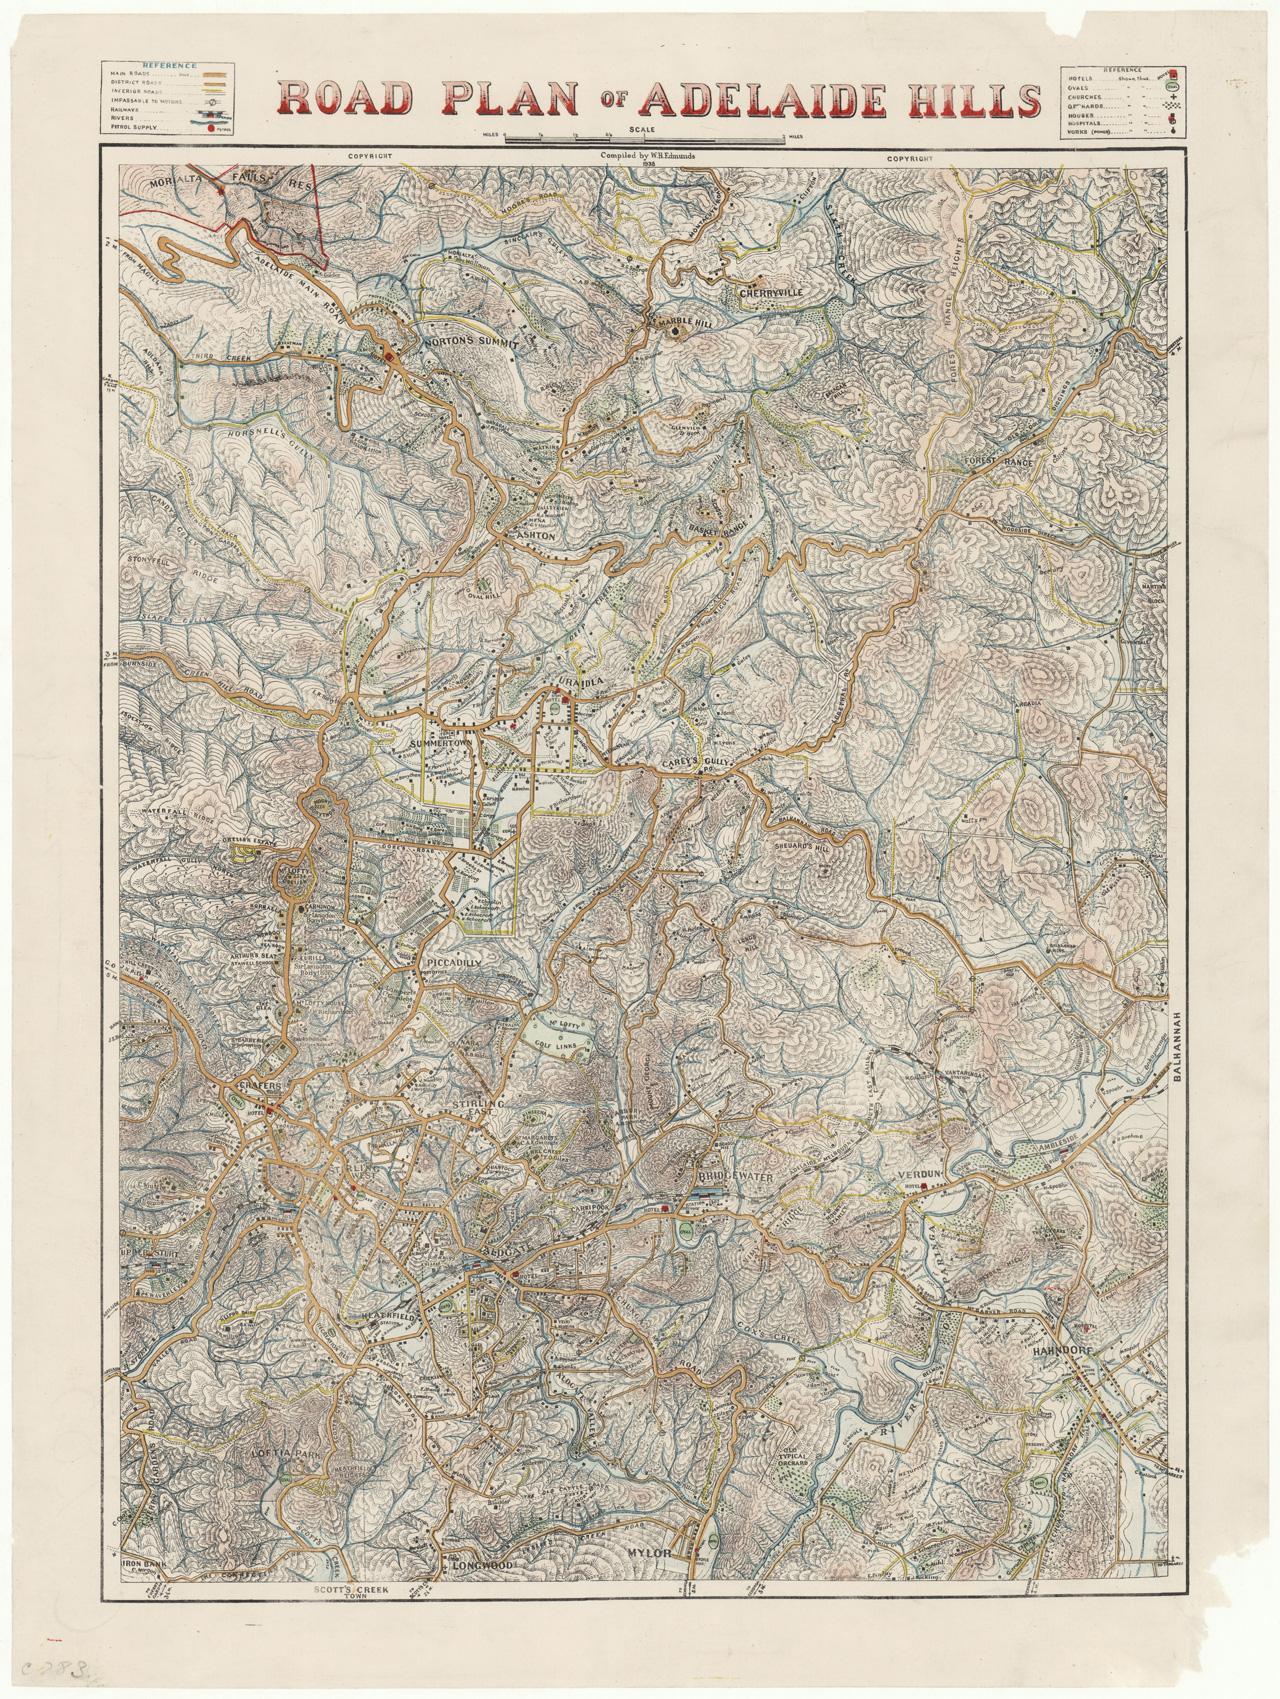 Road Plan of the Adelaide Hills. SLSA: Map Collection C283.